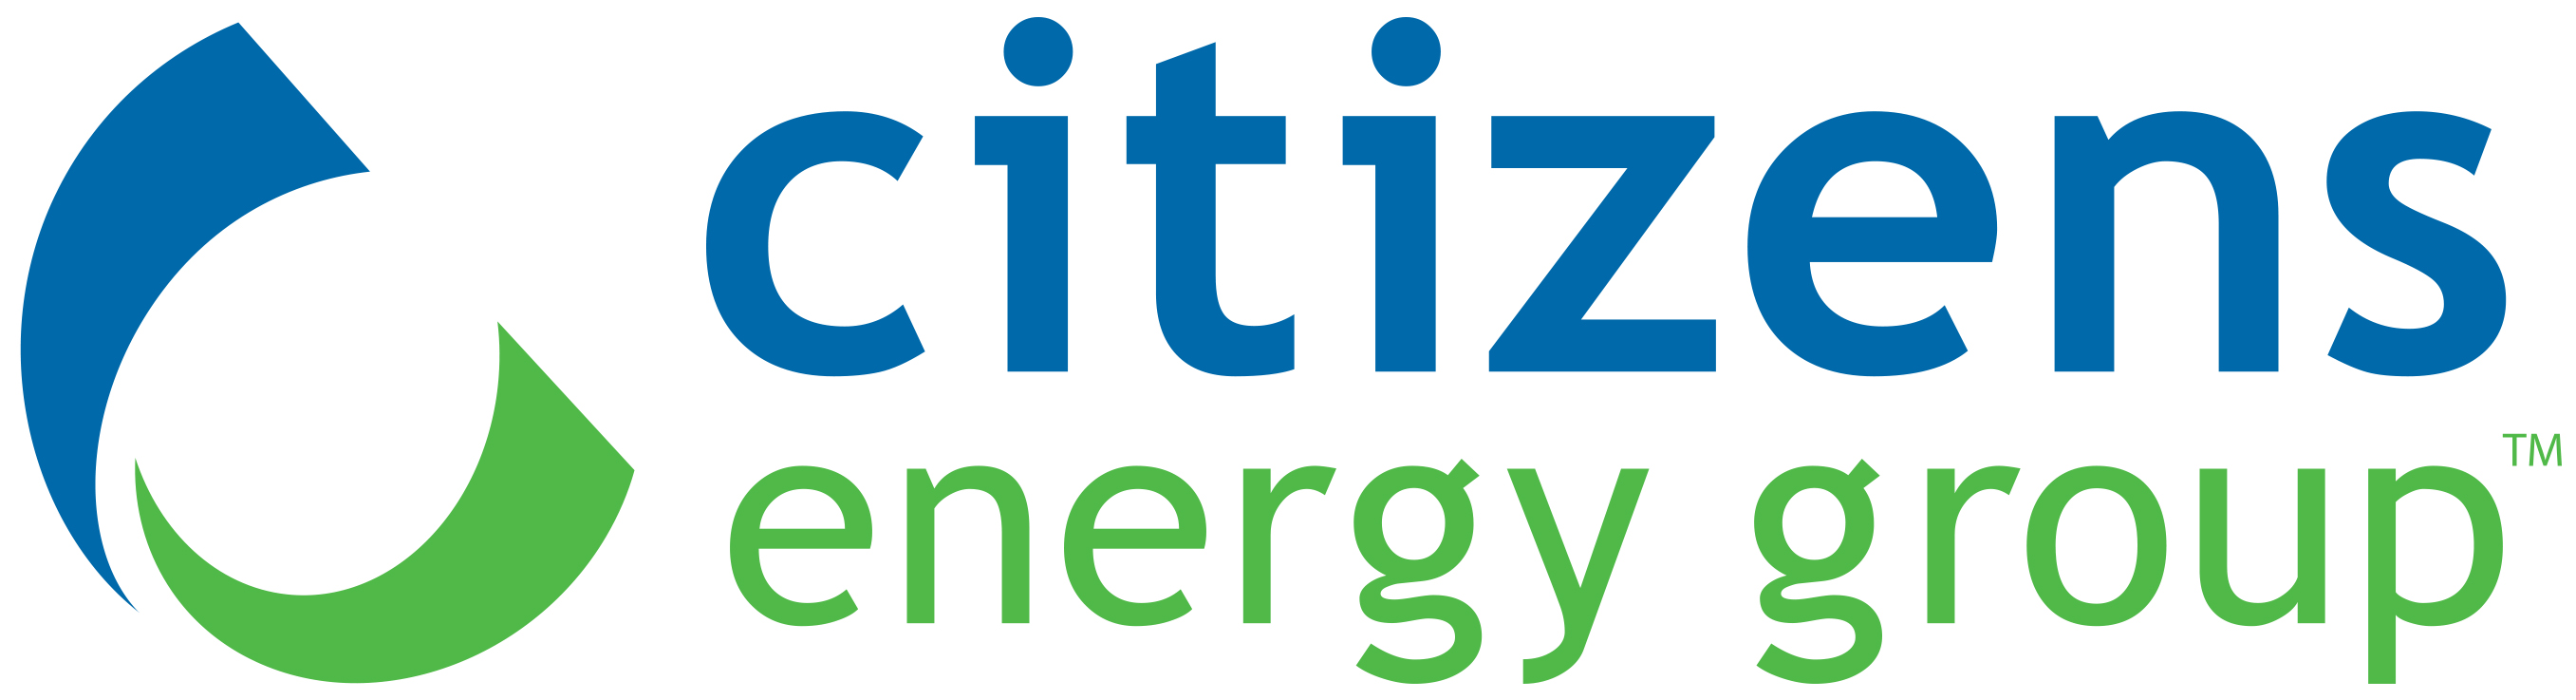 K. Citizens Energy Group (Mission)